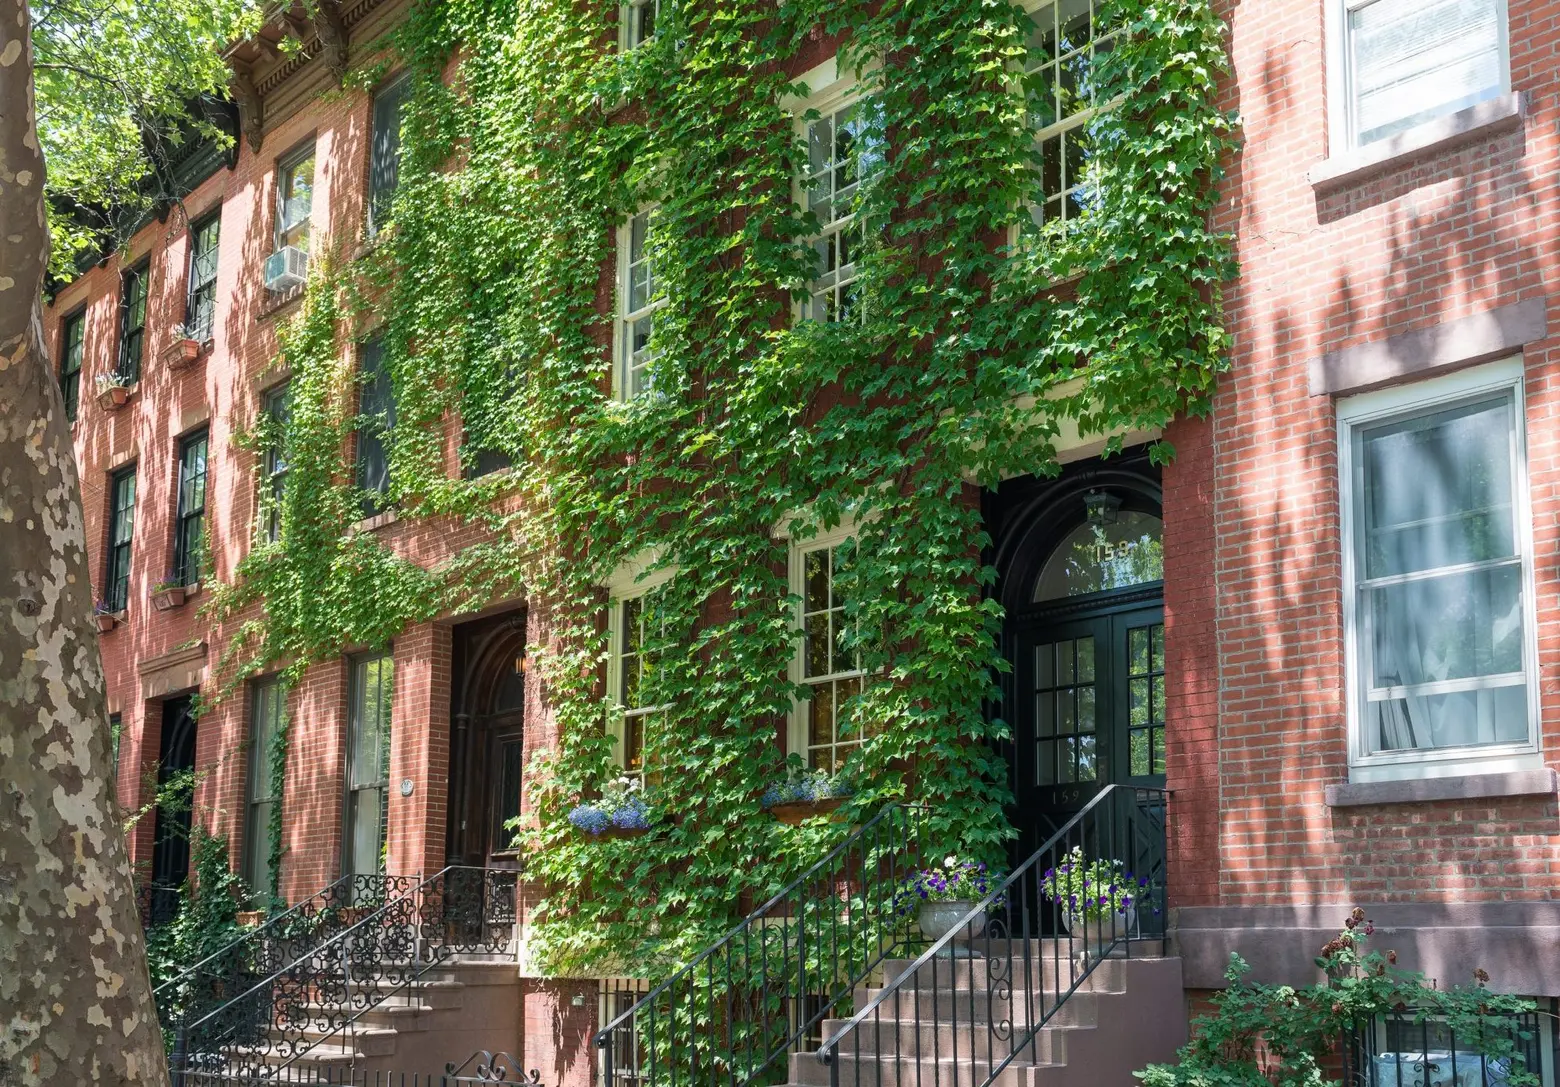 New Historic District more than doubles the landmarked buildings in Boerum Hill